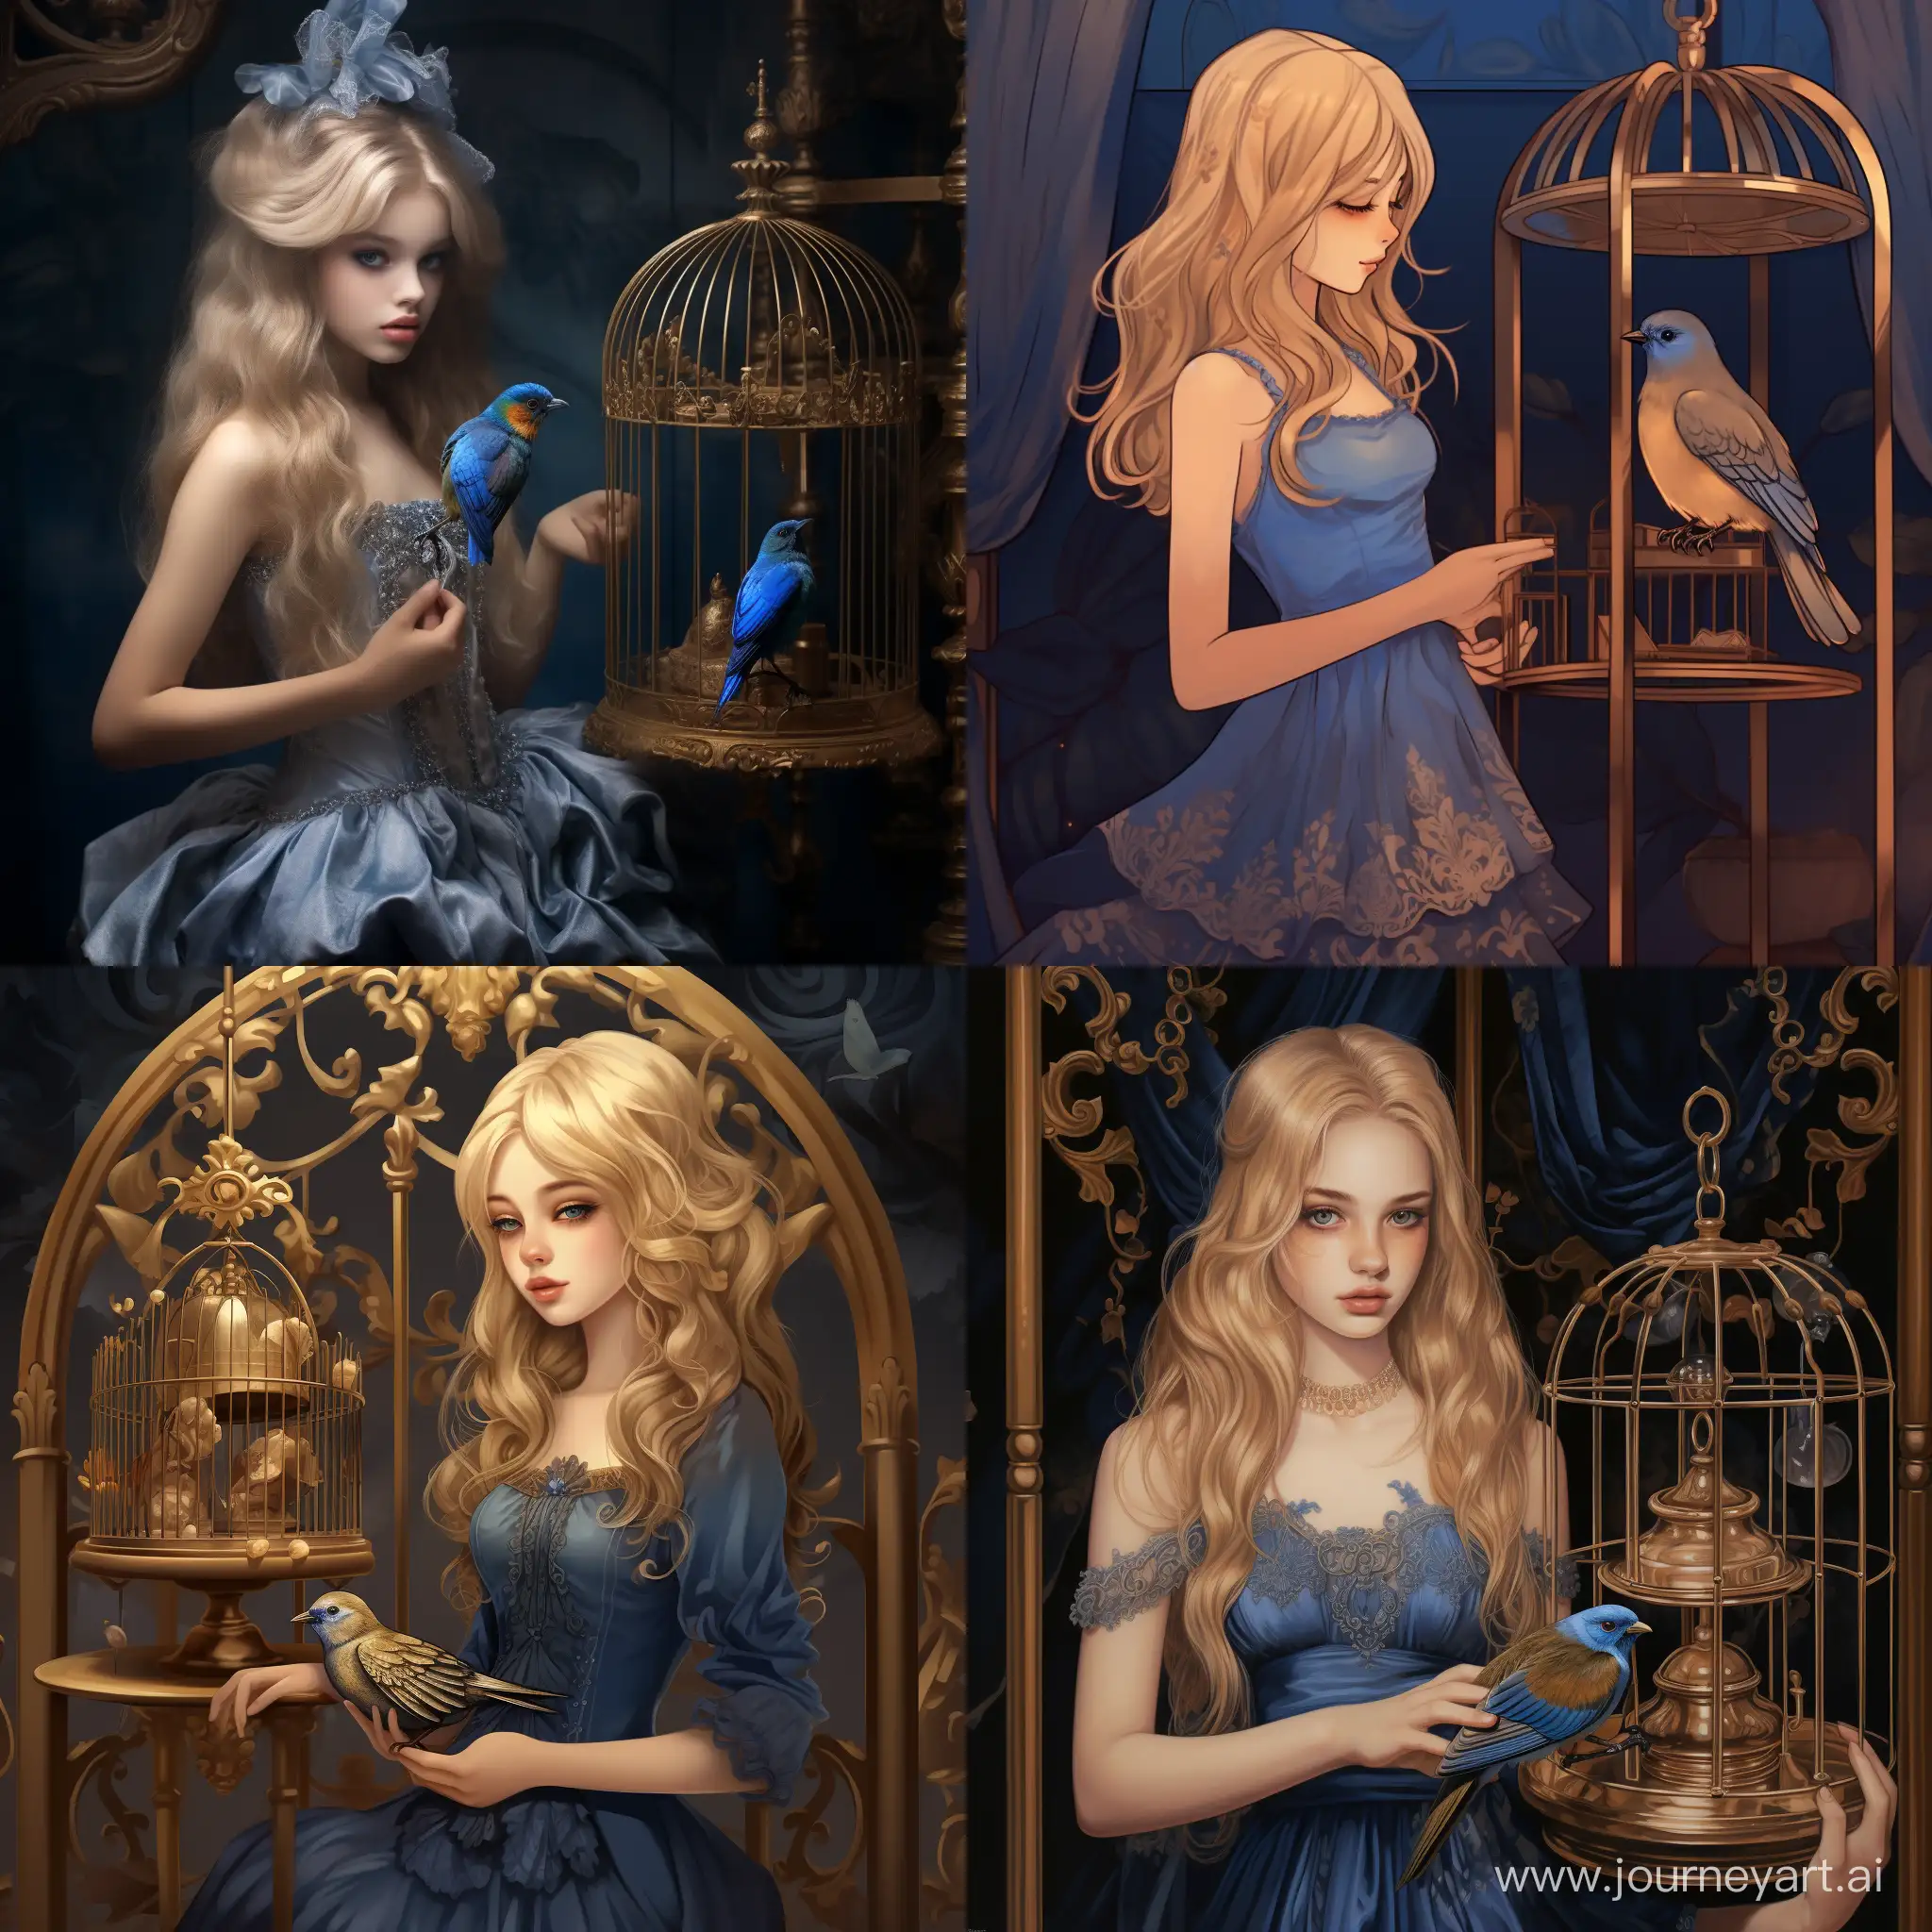 Blond-Girl-in-Blue-Dress-with-Golden-Frills-Standing-Next-to-a-Golden-Birdcage